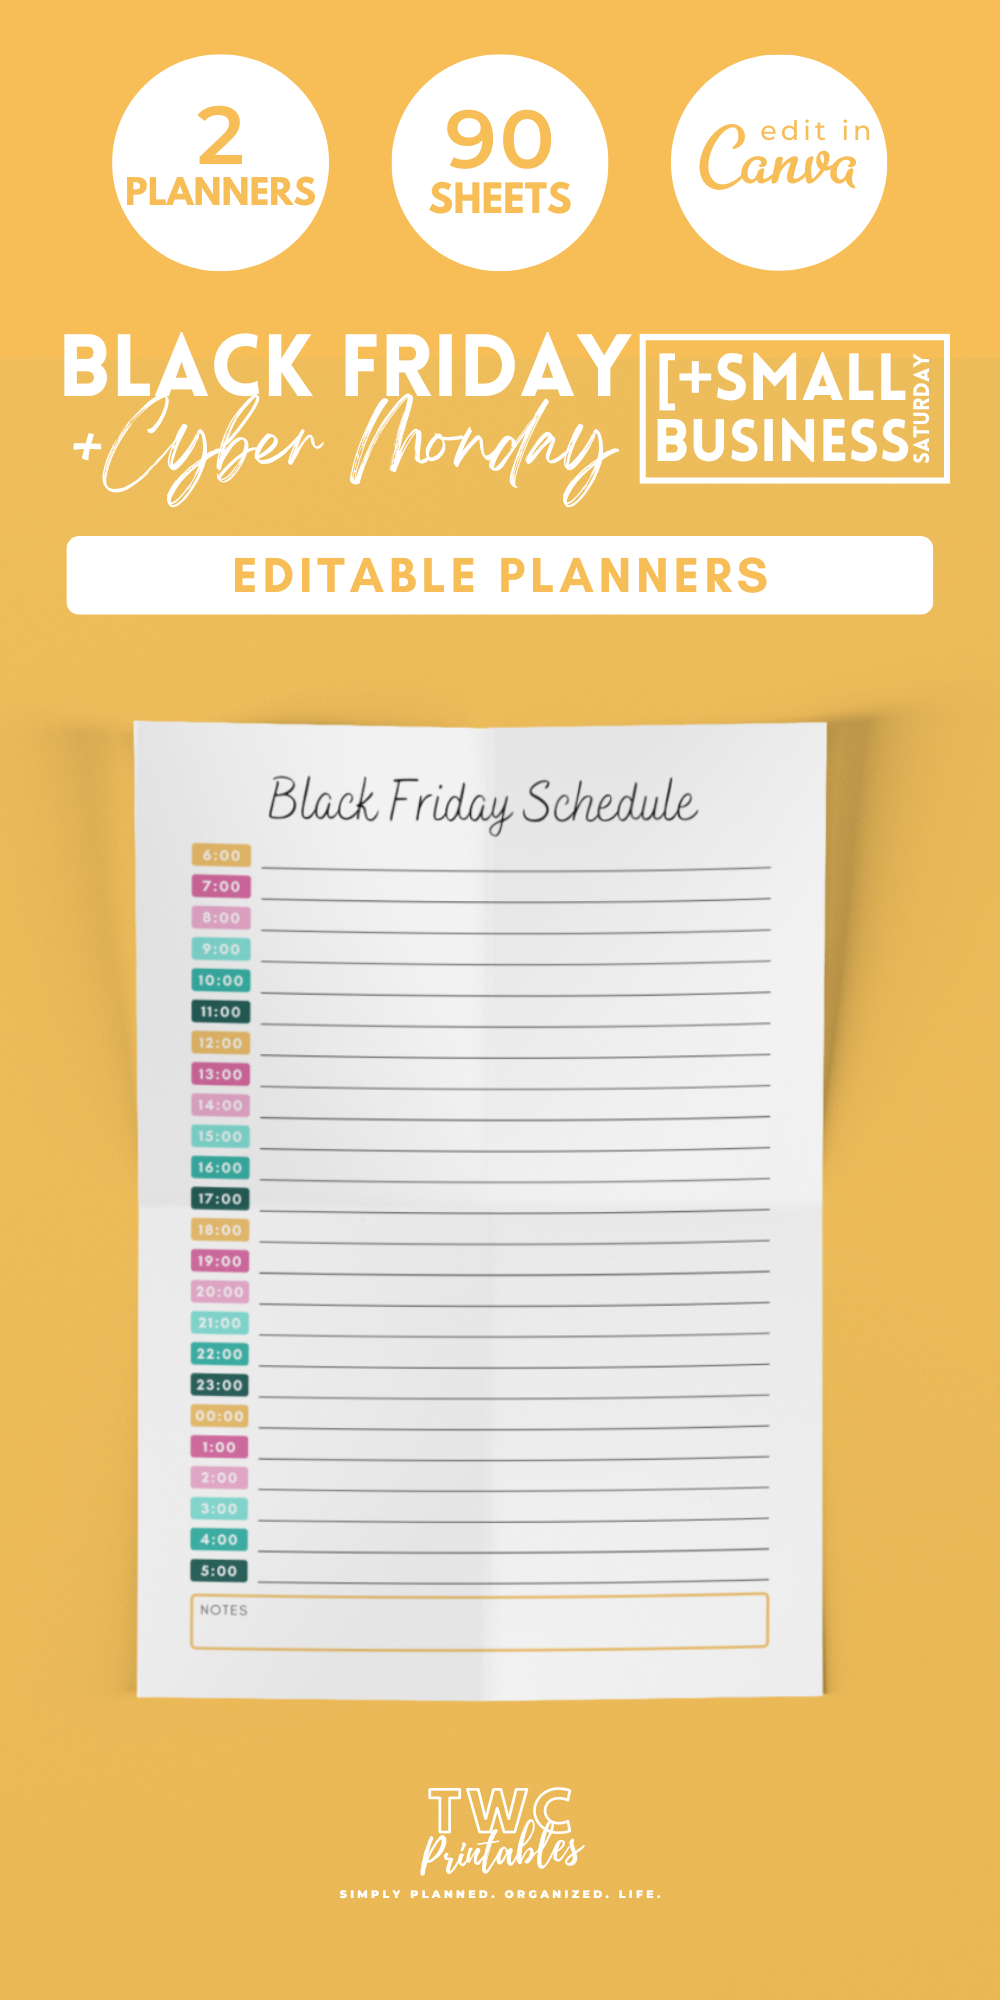 Black Friday Schedule - Black Friday Sales Planner Canva Templates